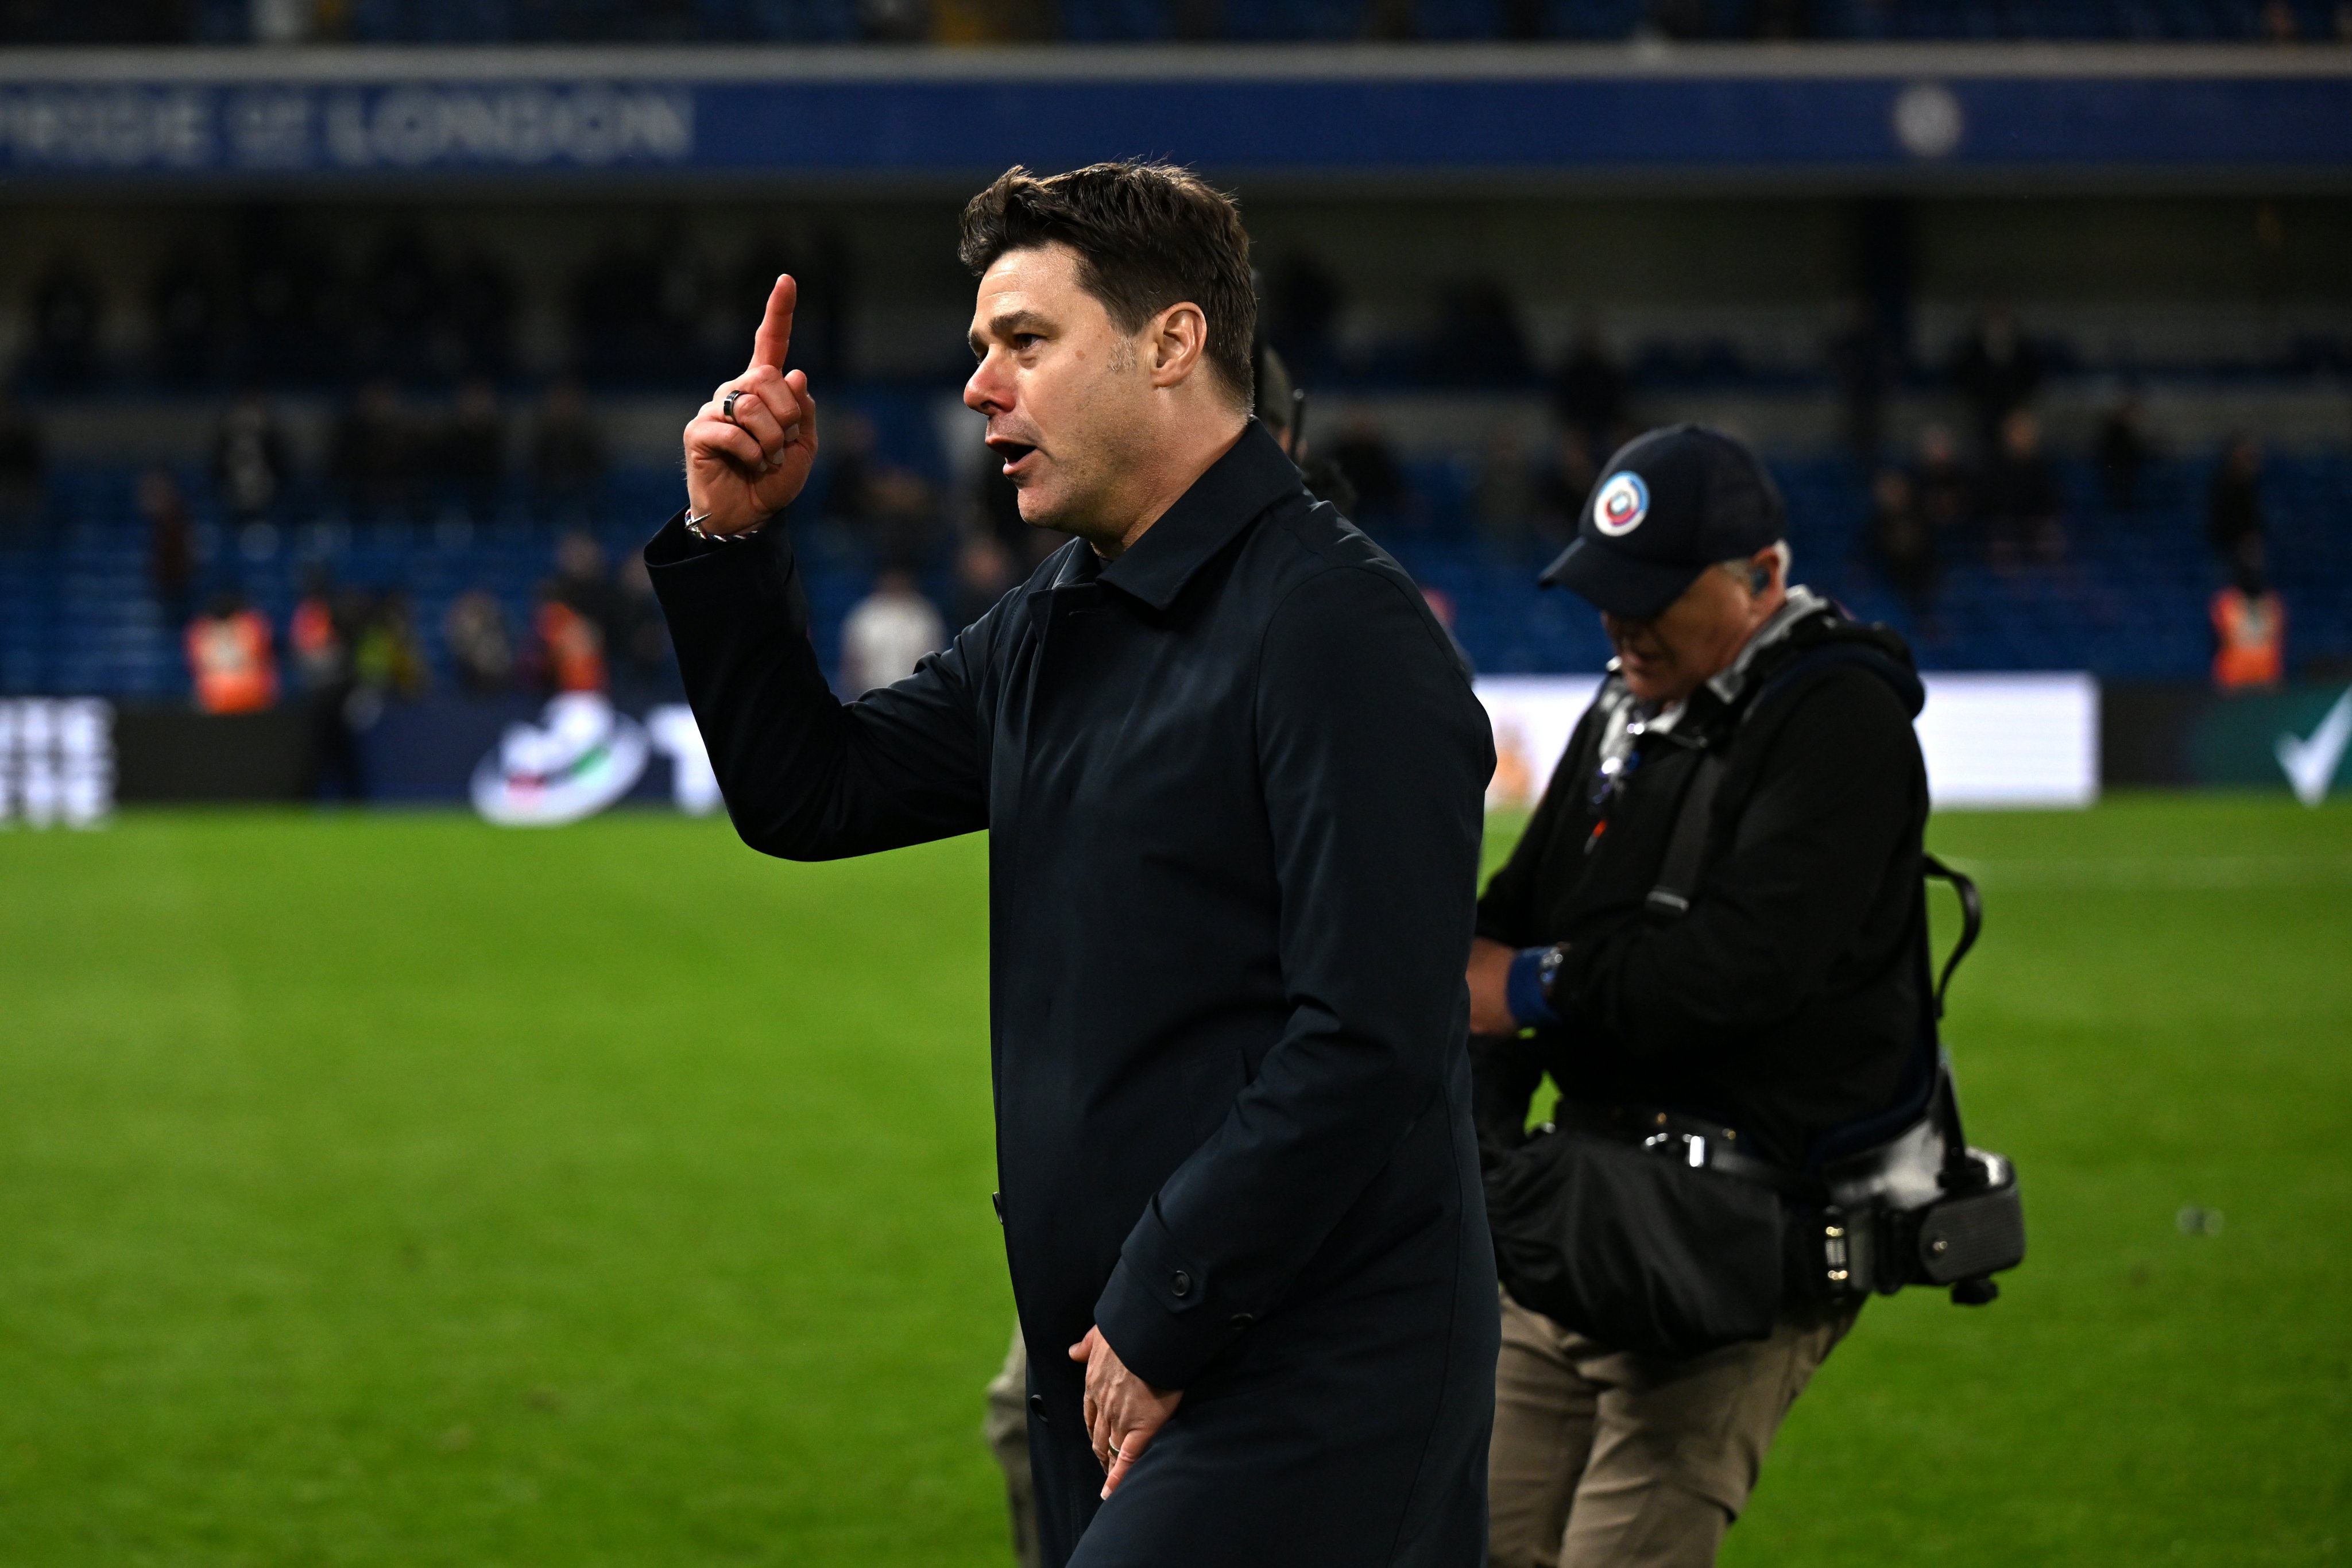 Mauricio Pochettino casts doubt over his Chelsea future with post match comments